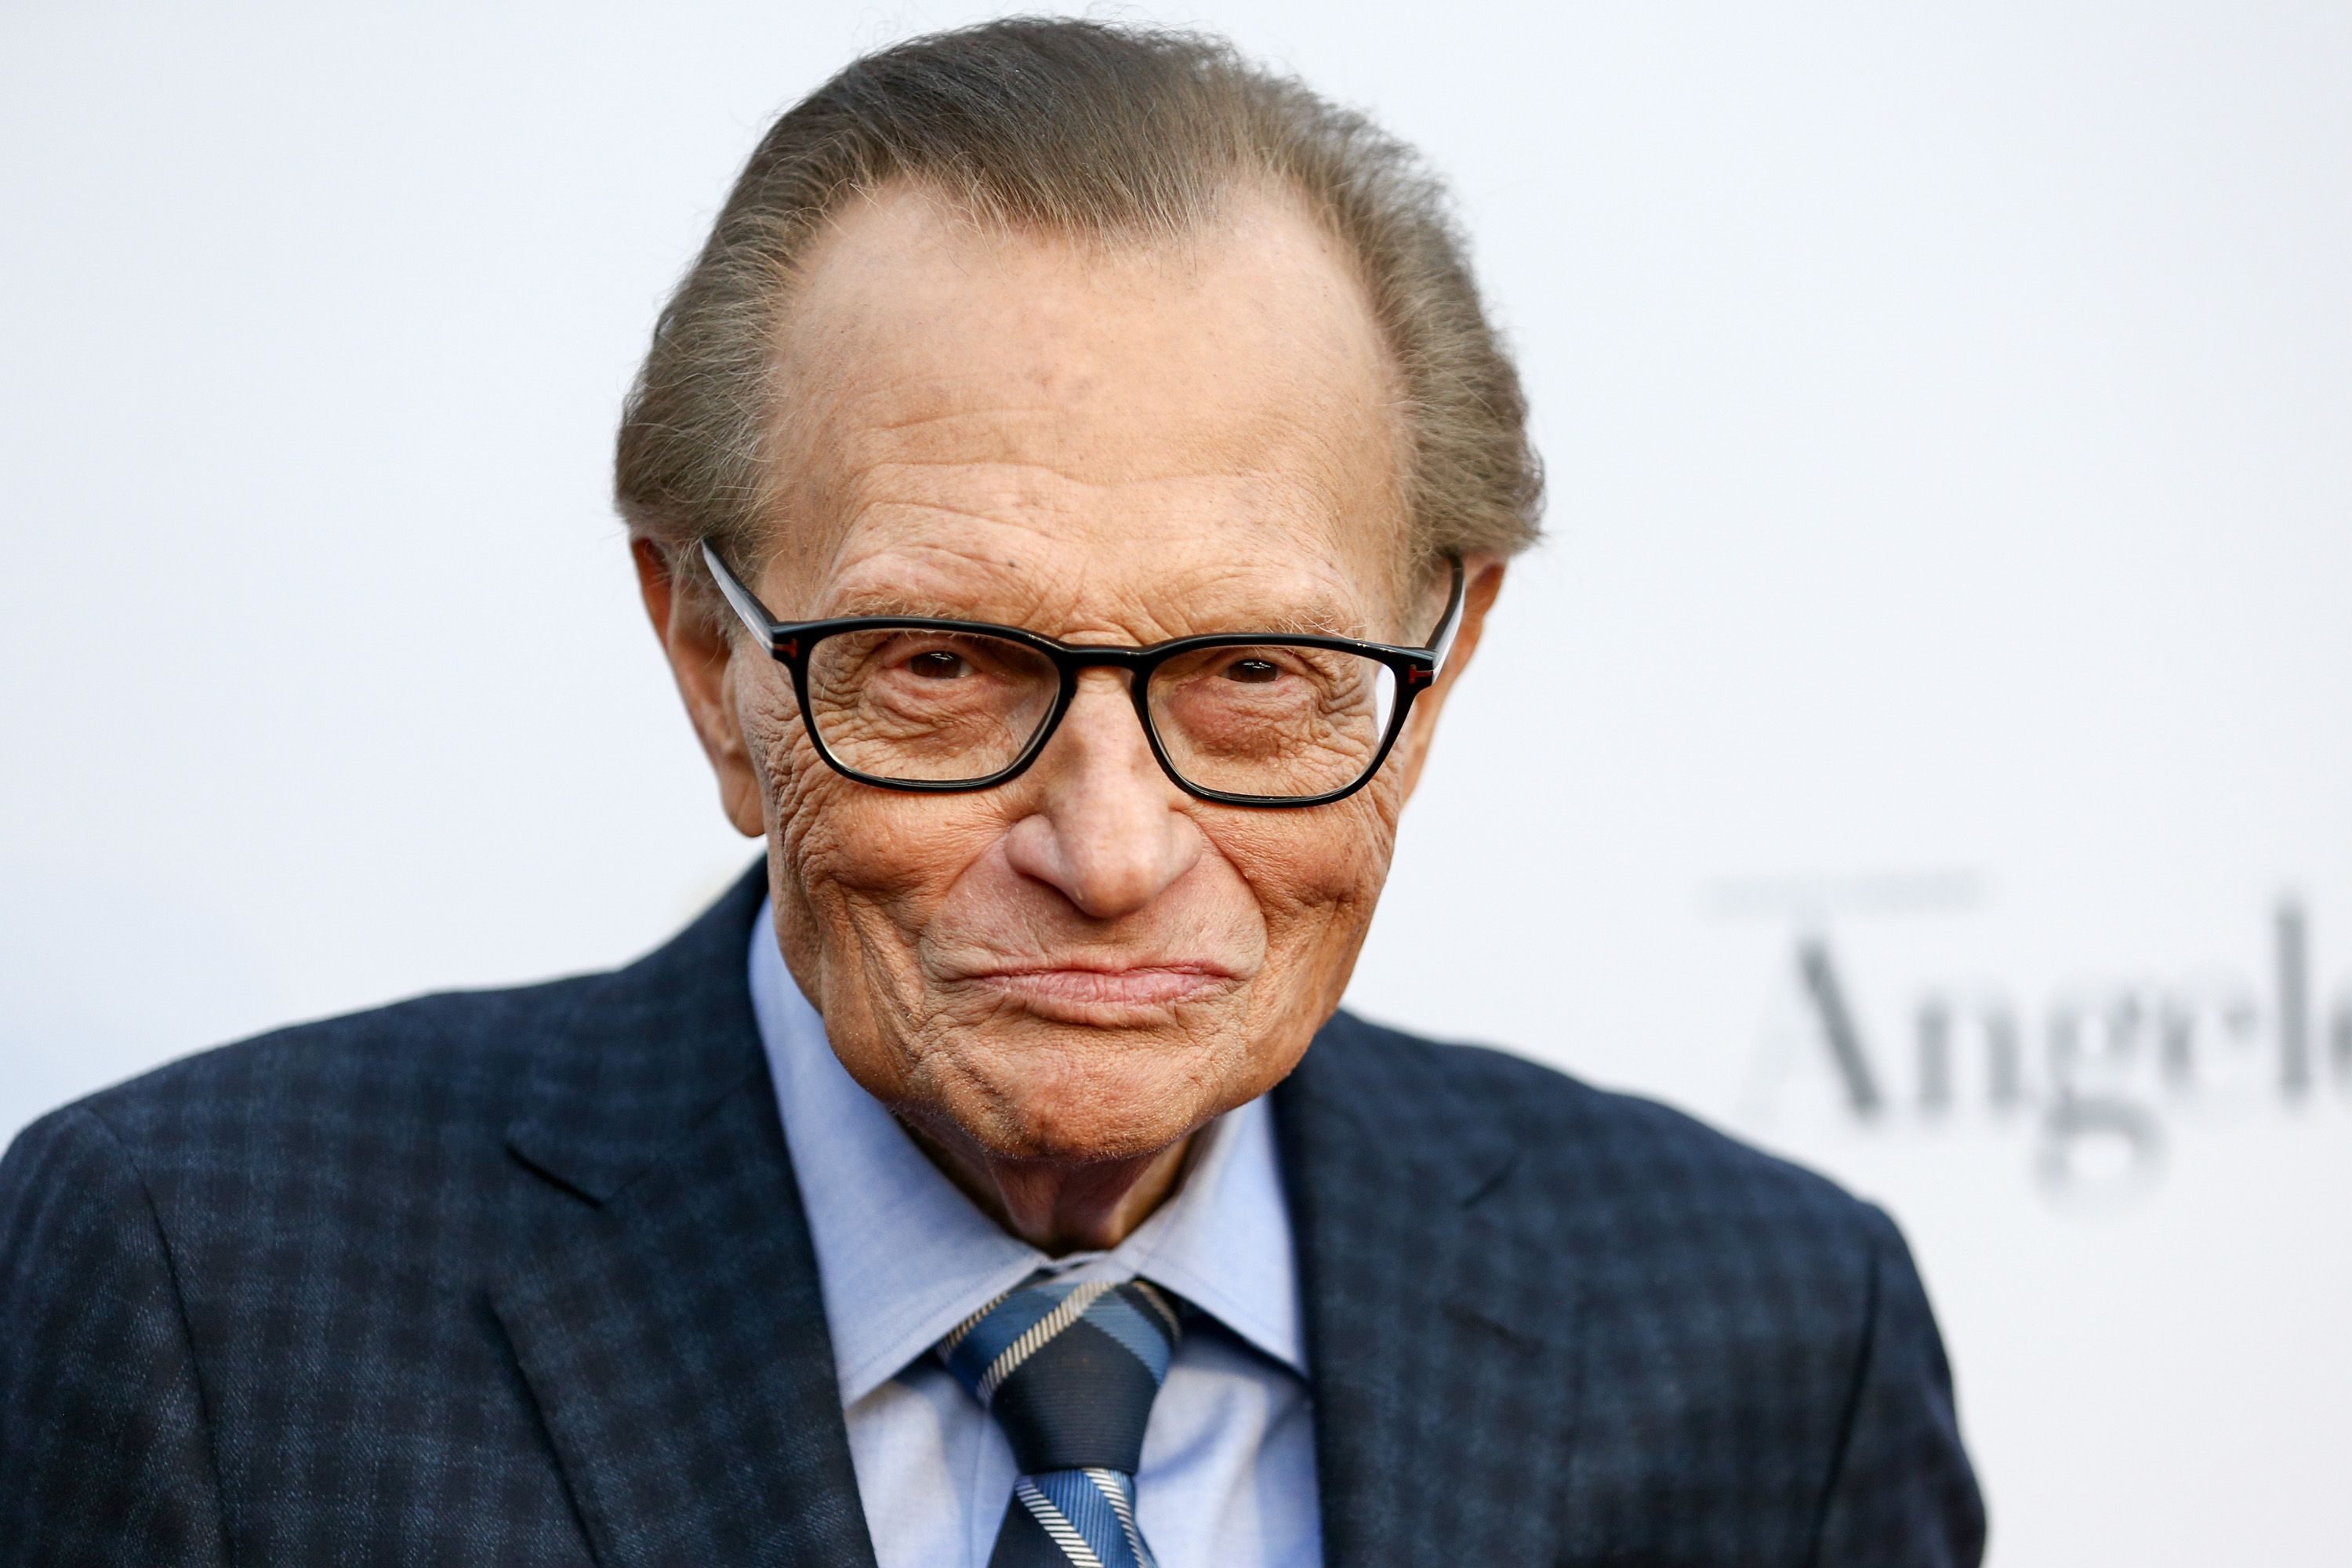  Larry King at the "Larry King" 60th Broadcasting Anniversary Event at HYDE Sunset: Kitchen + Cocktails | Photo: Getty Images